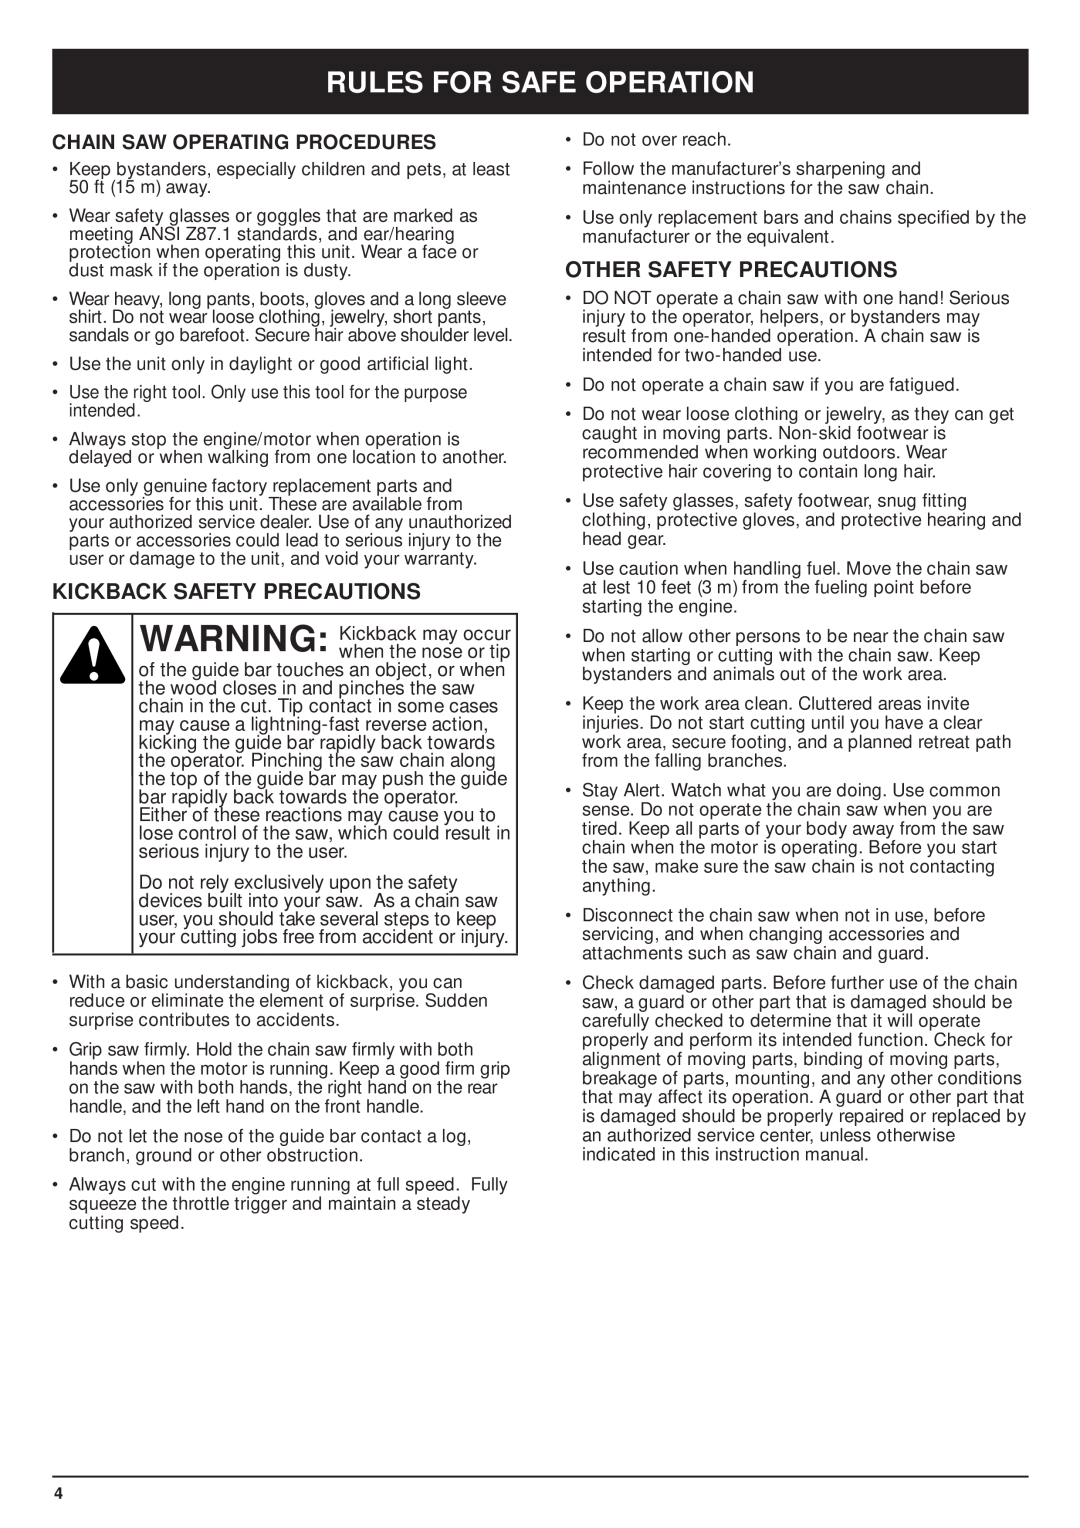 MTD TBPS Kickback Safety Precautions, Other Safety Precautions, Chain Saw Operating Procedures, Rules For Safe Operation 